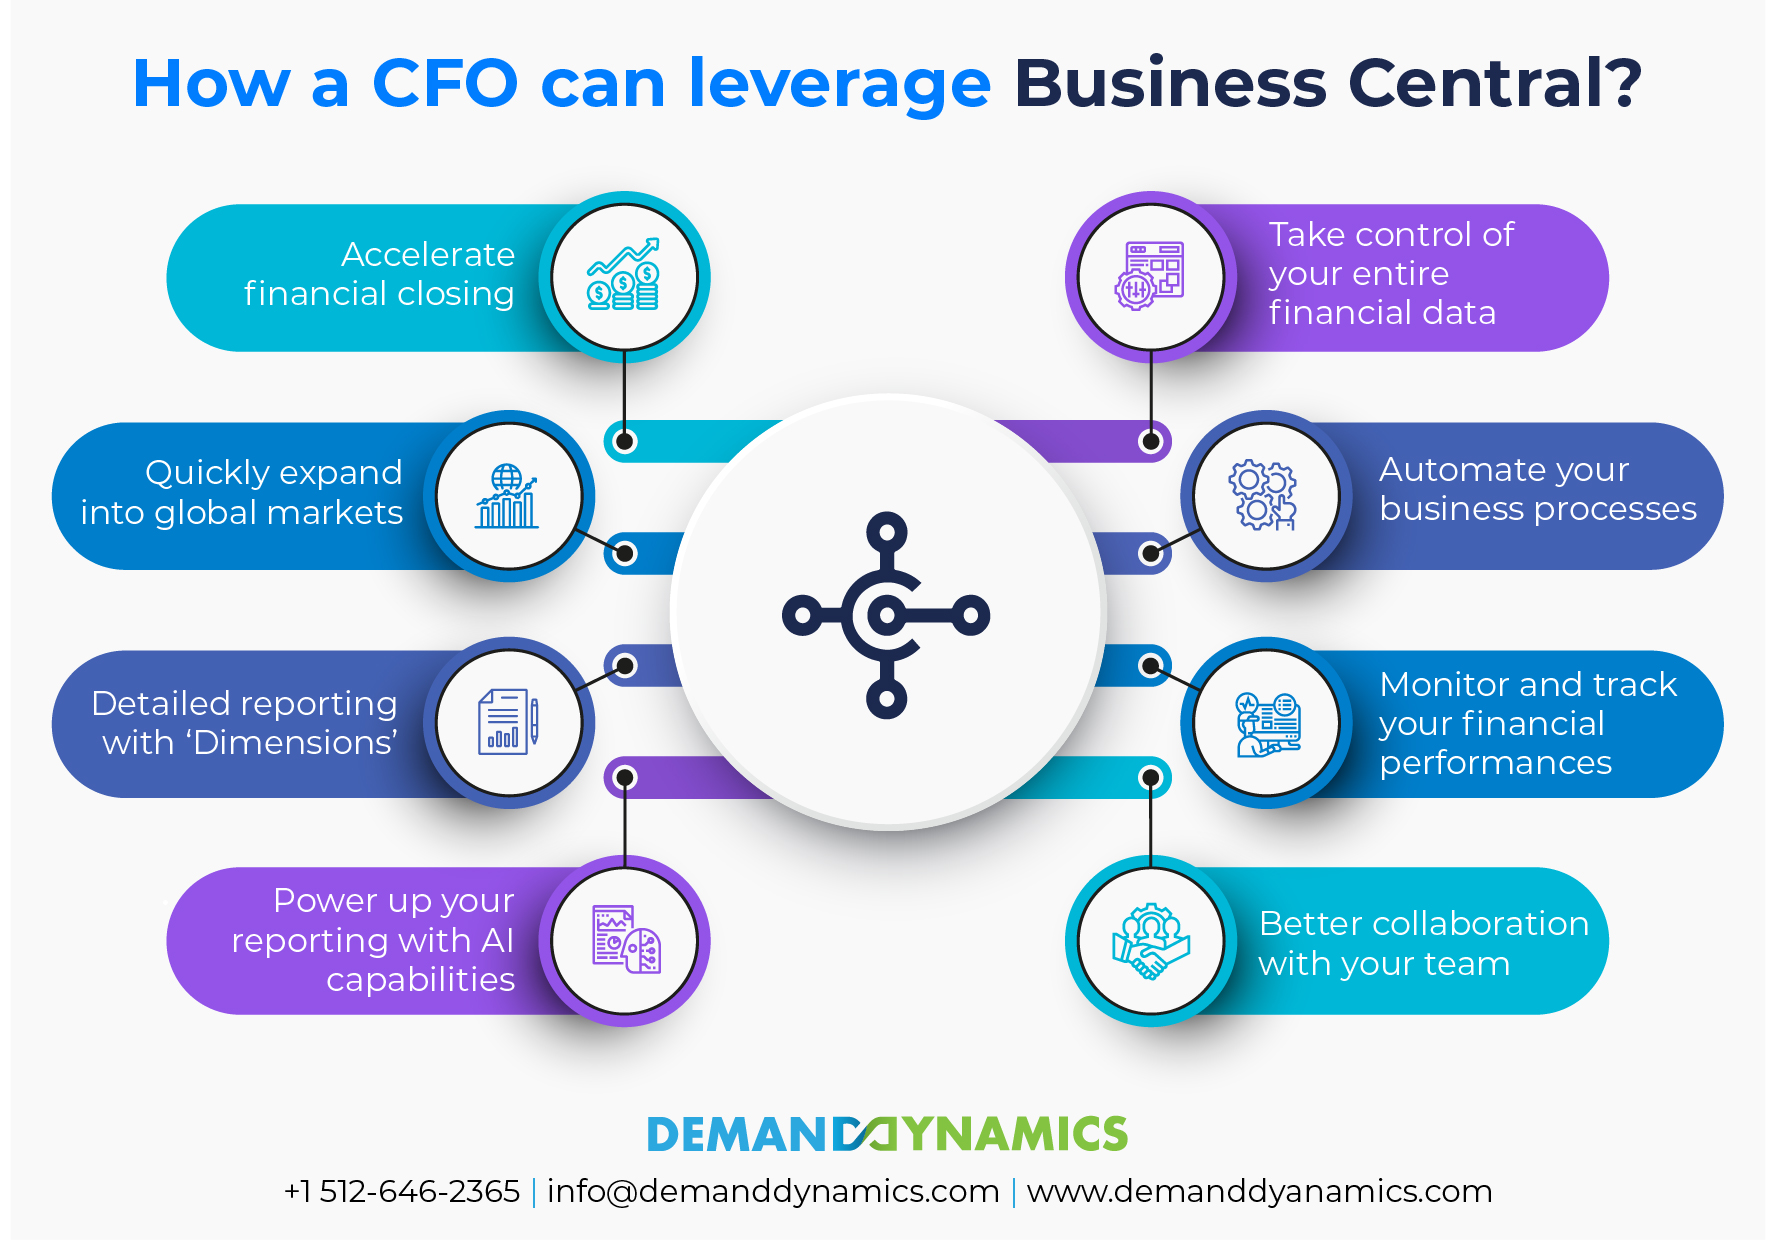 How Can CFOs Leverage Microsoft Dynamics 365 Business Central Capabilities?